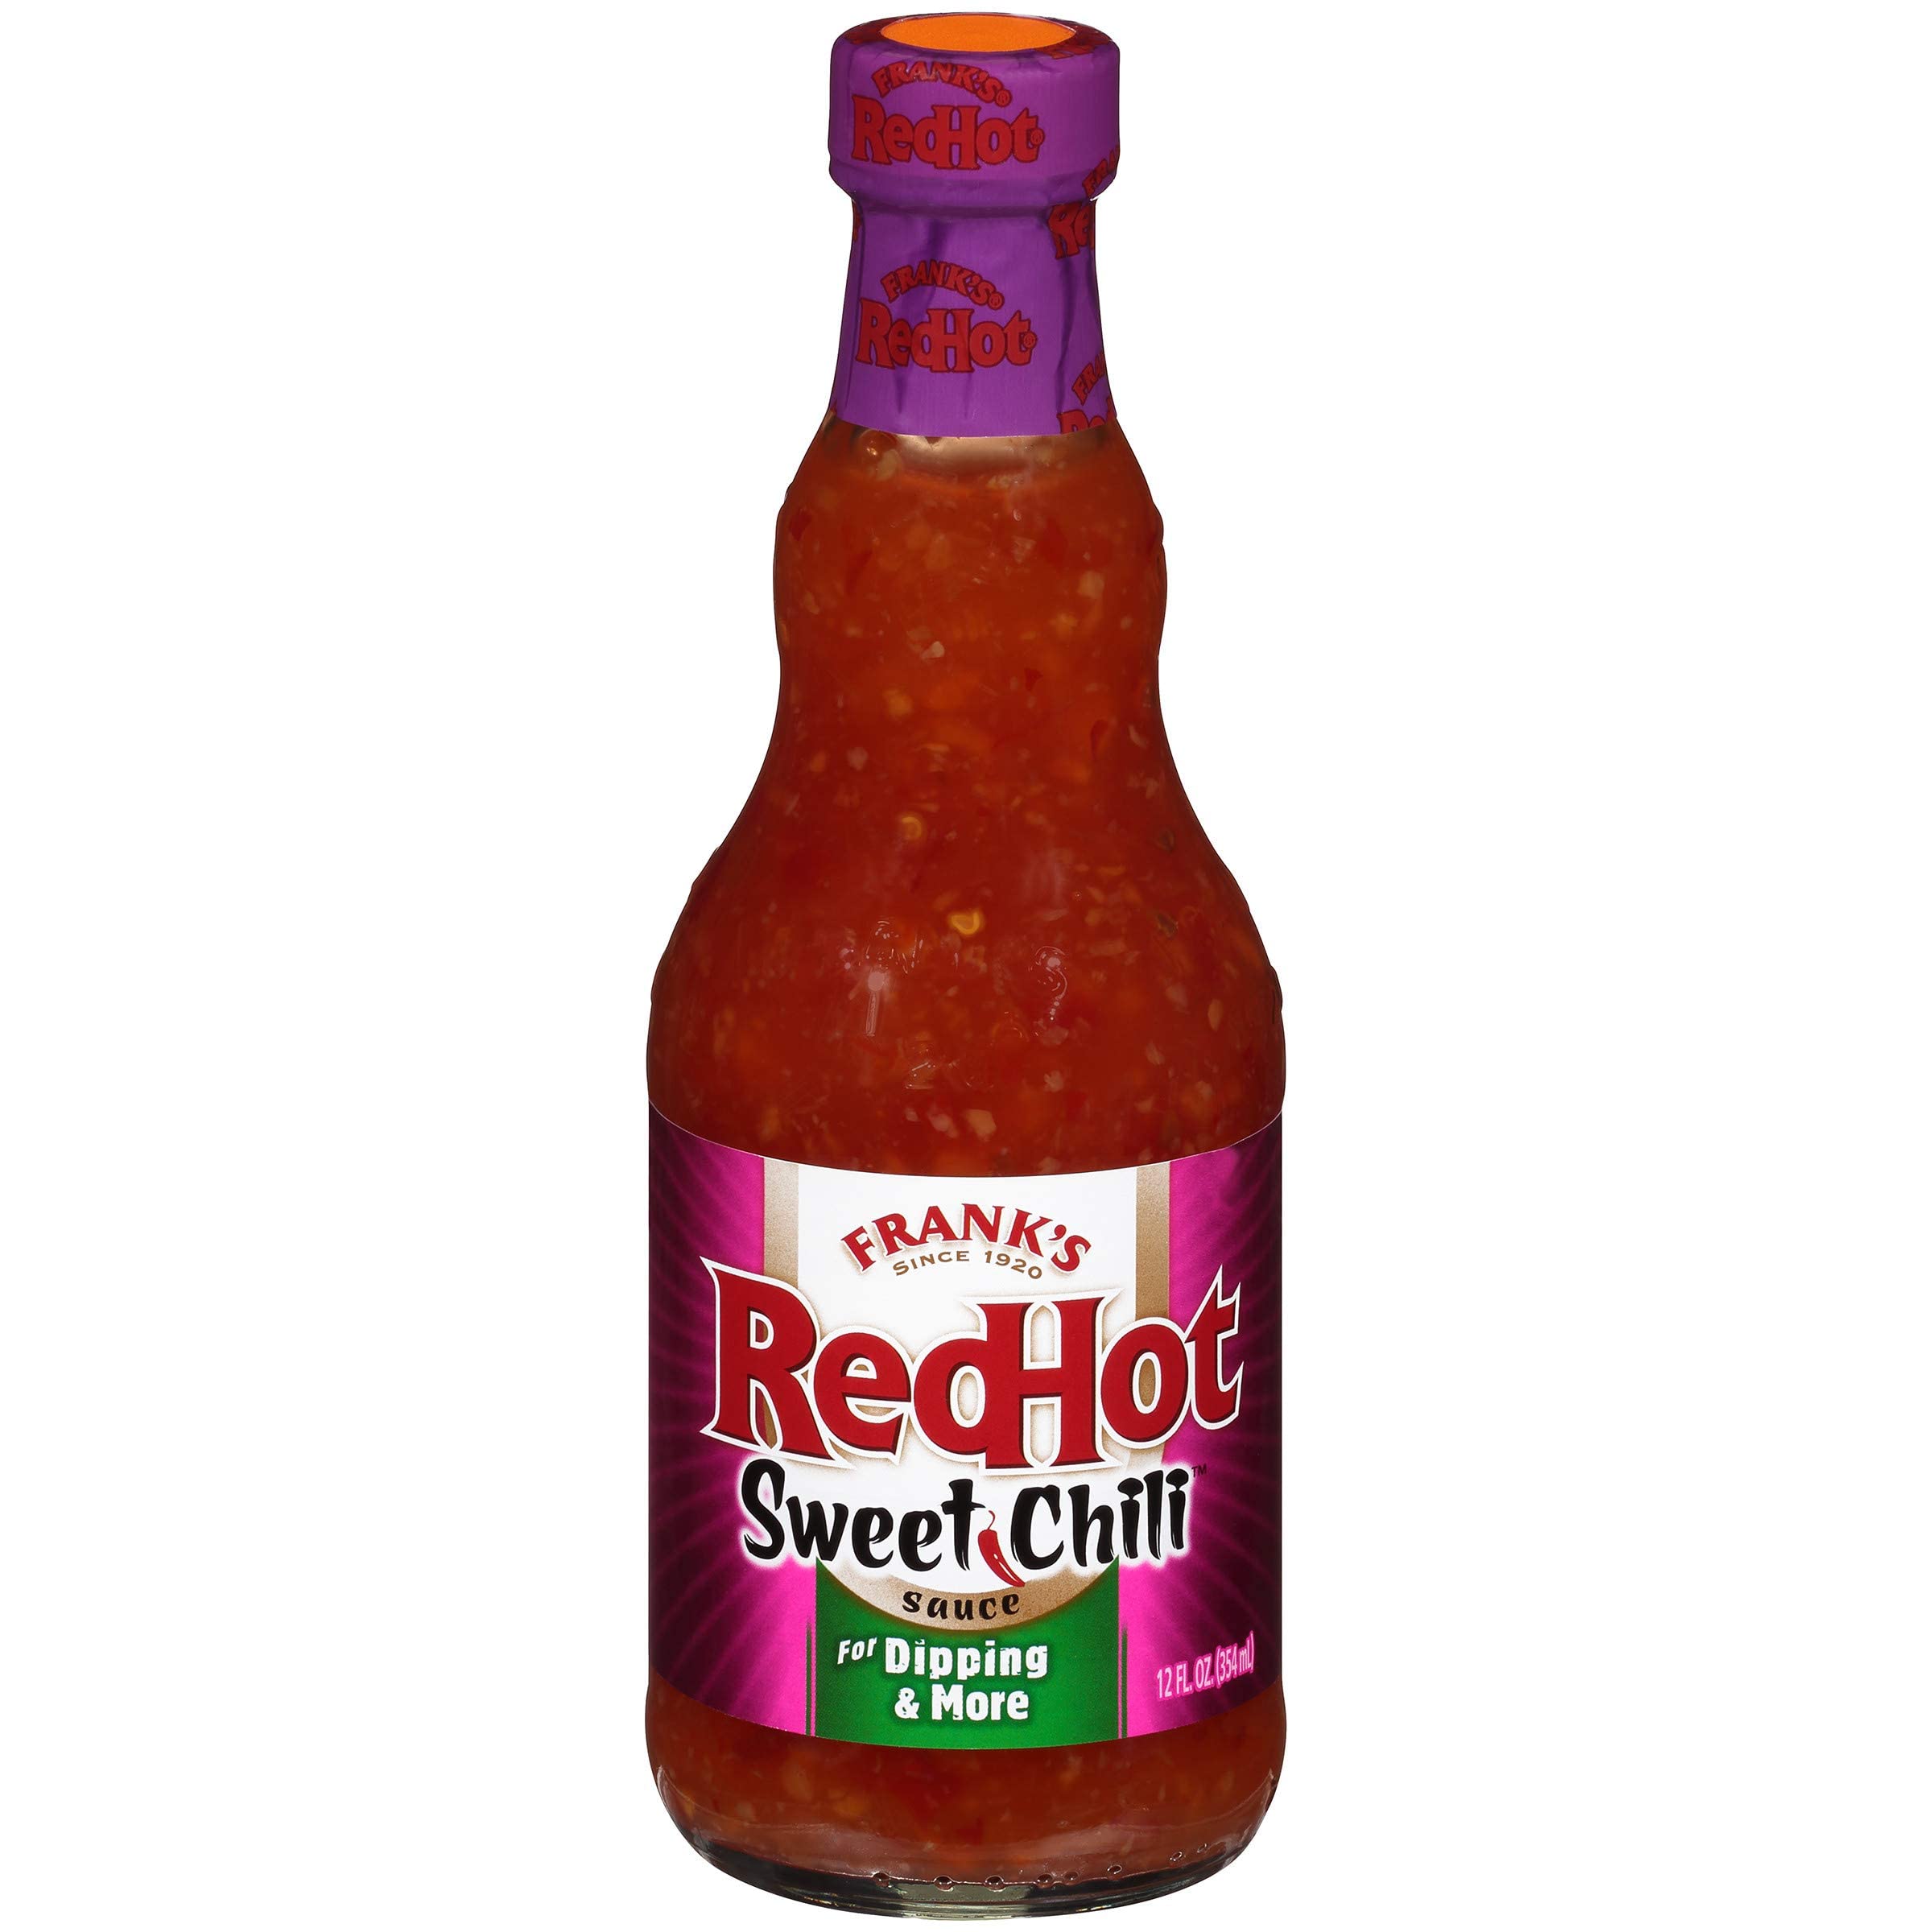 Frank's RedHot Sweet Chili Sauce, 12 fl oz. Free shipping with Prime of purchase of $25+ $2.27